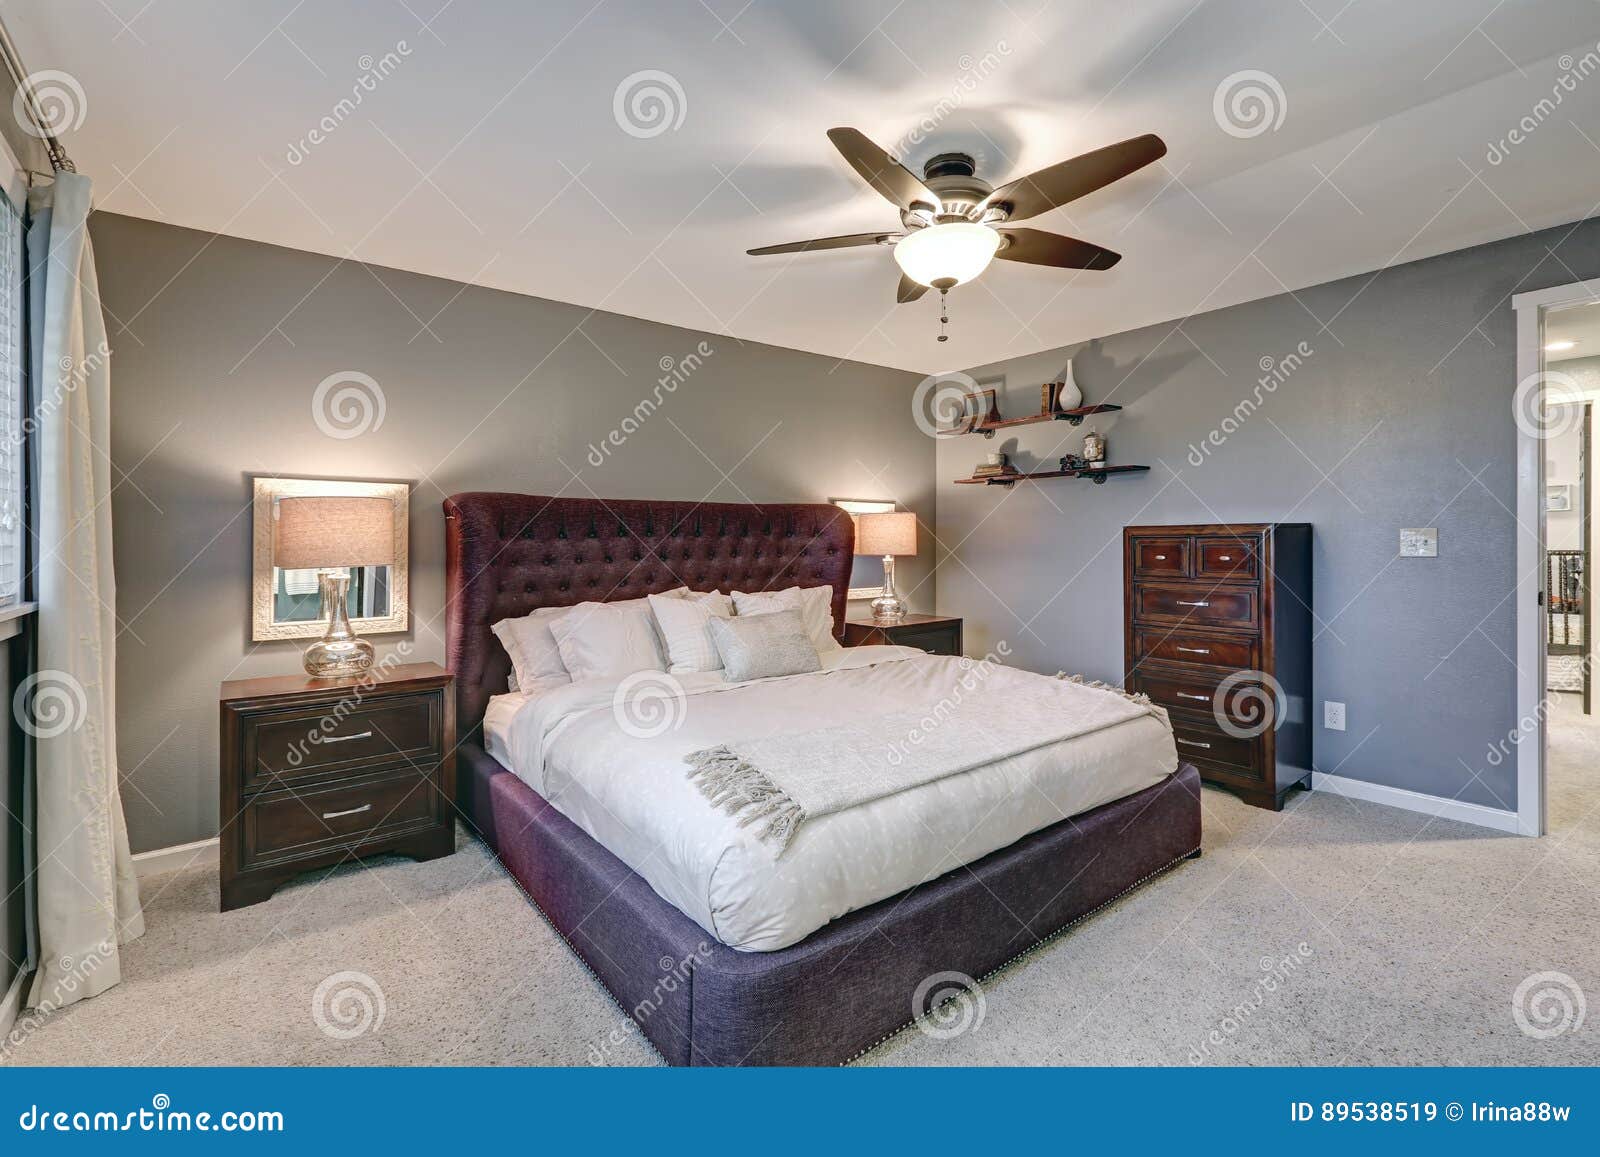 Master Bedroom Suite With Gorgeous Queen Size Bed Stock